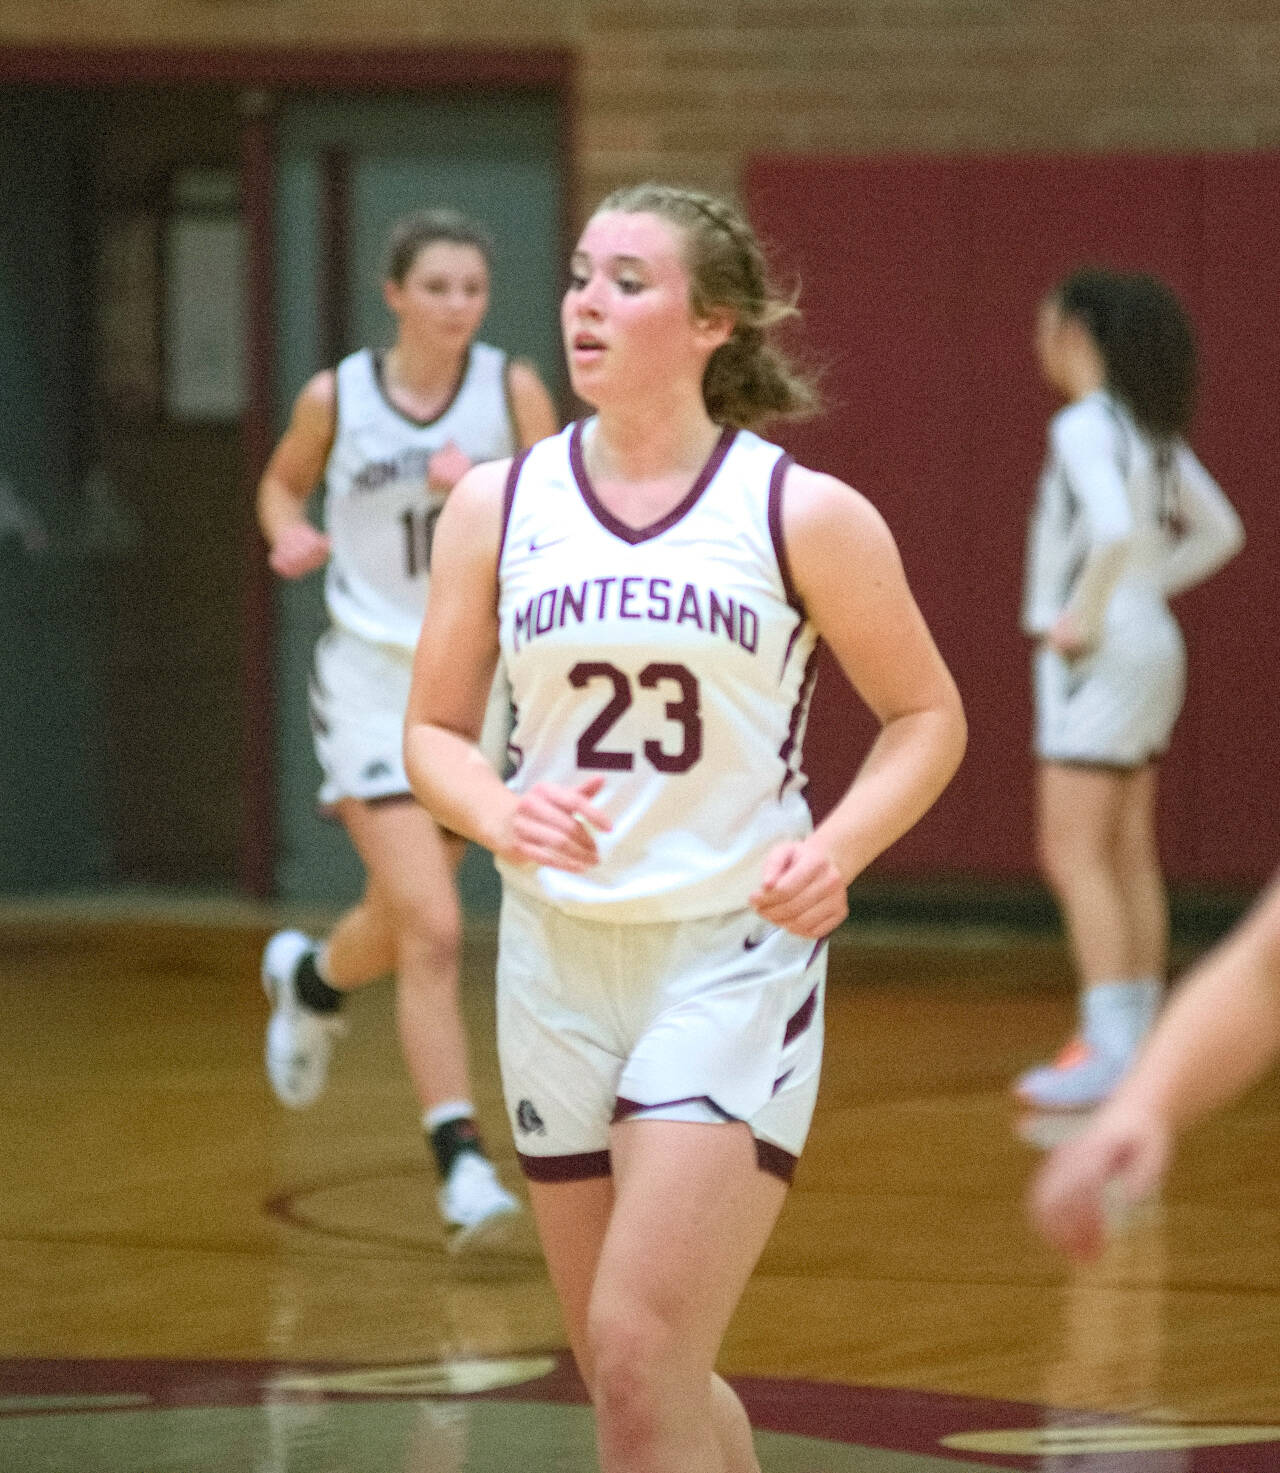 DAILY WORLD FILE PHOTO
Montesano senior Paige Lisherness scored 17 points to lead the Bulldogs to a 62-37 win on the road over King's Way Christian on Thursday.